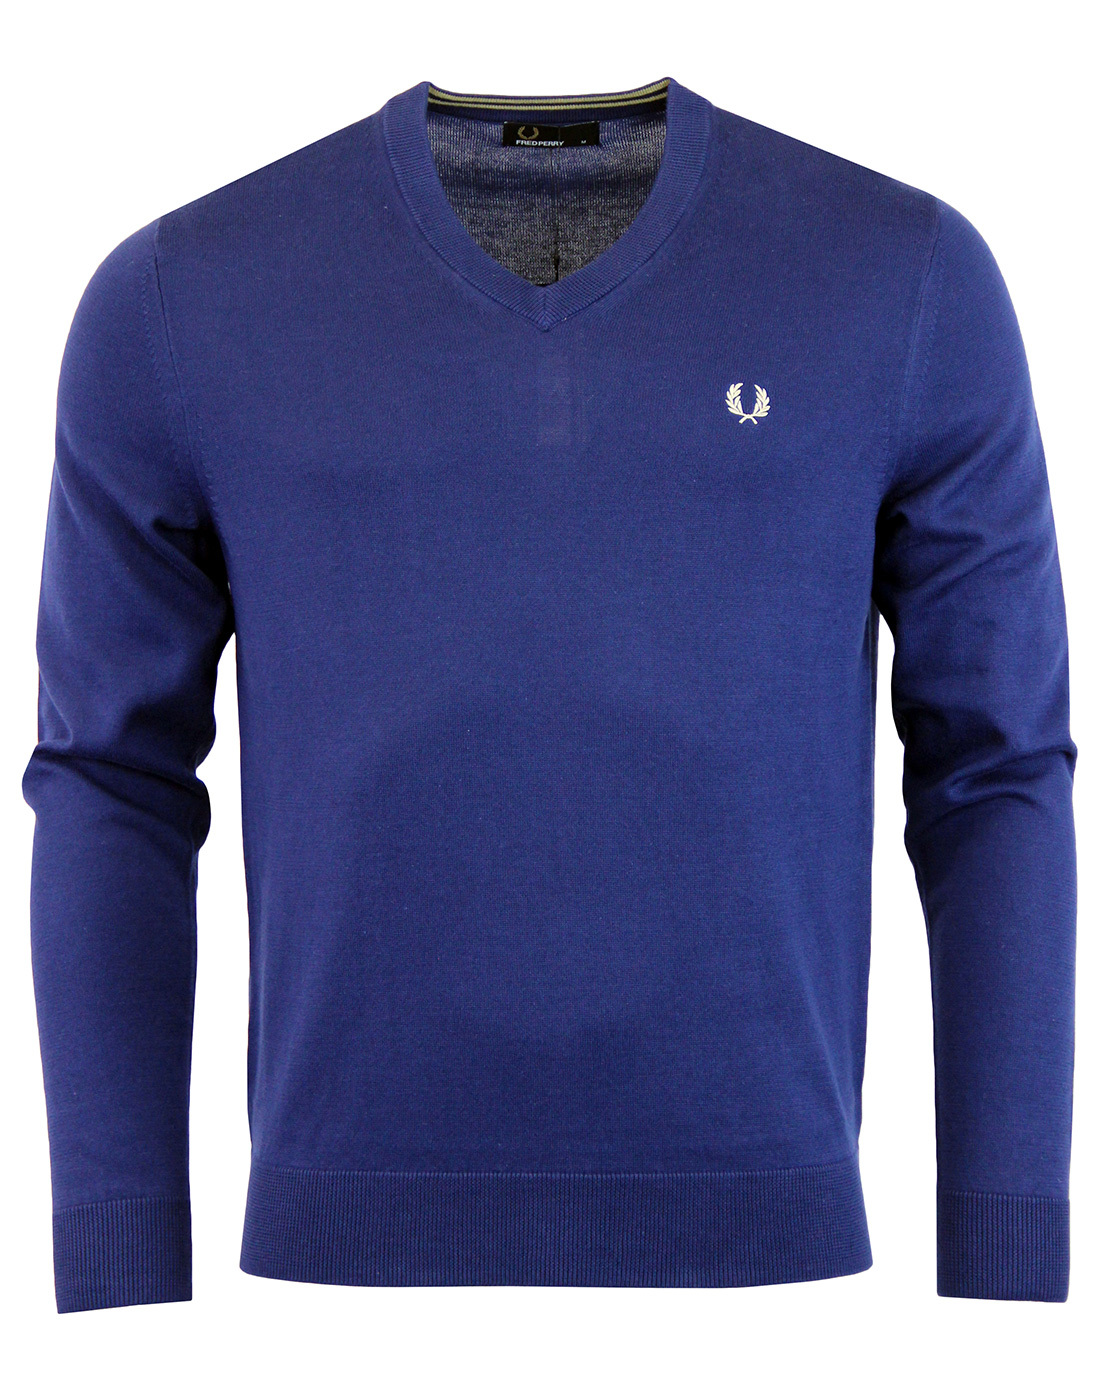 FRED PERRY Men's Classic Cotton V-Neck Sweater FB